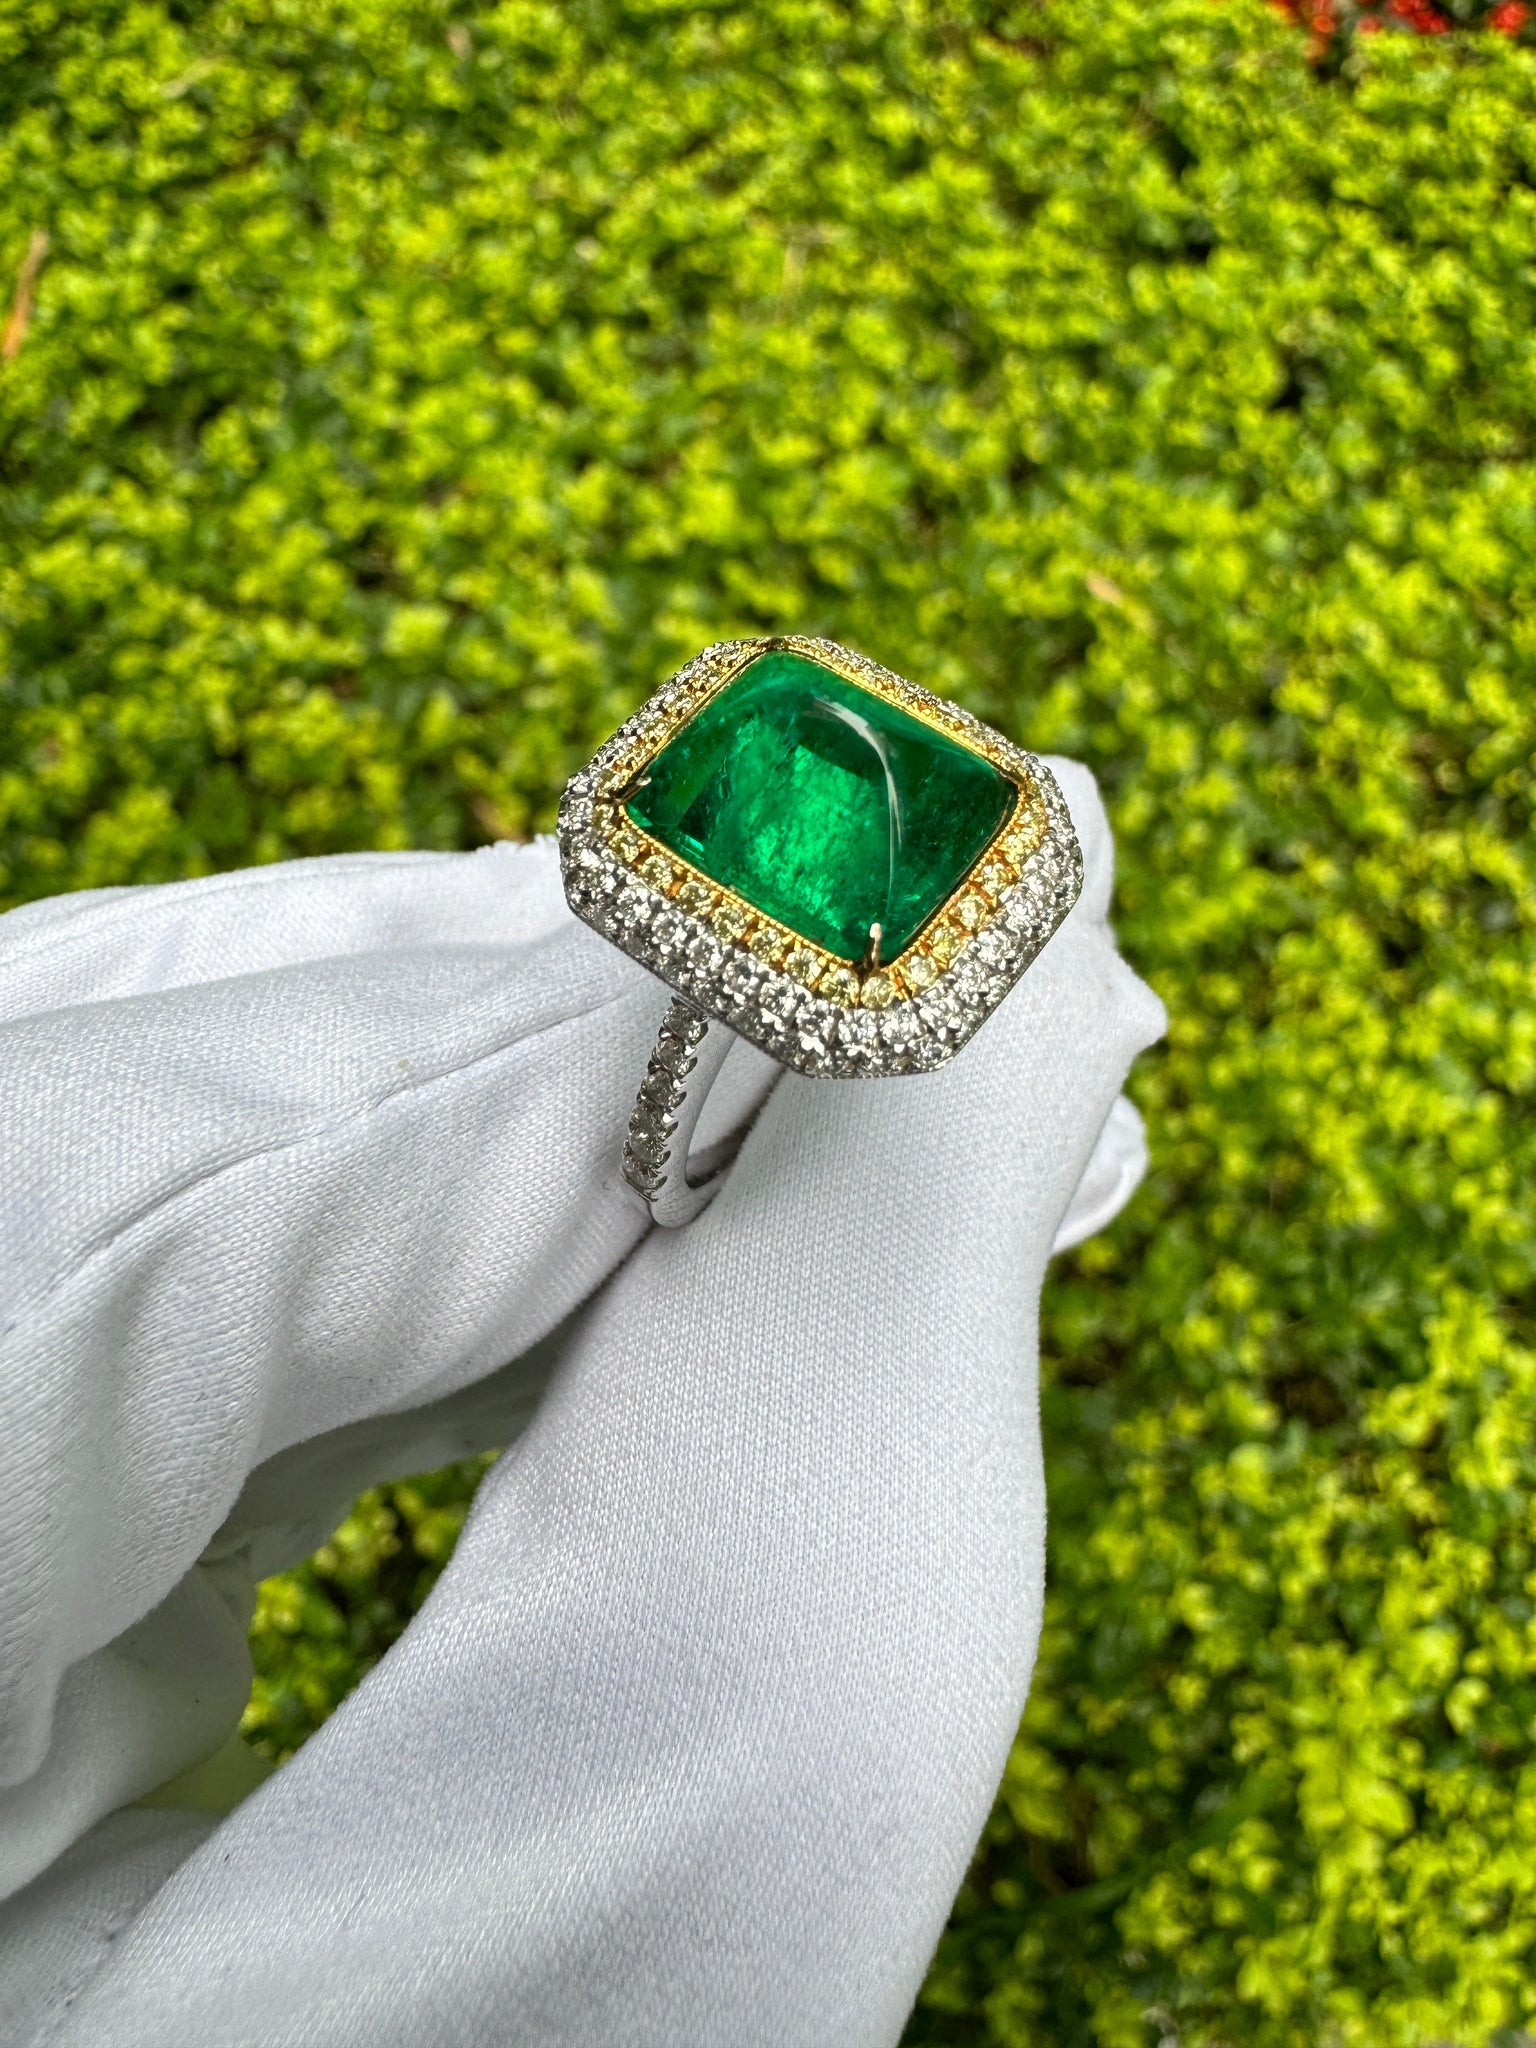 4.49 Carat Sugarloaf Cabochon Cut Colombian Emerald and Diamond Halo Ring in 18k White Gold